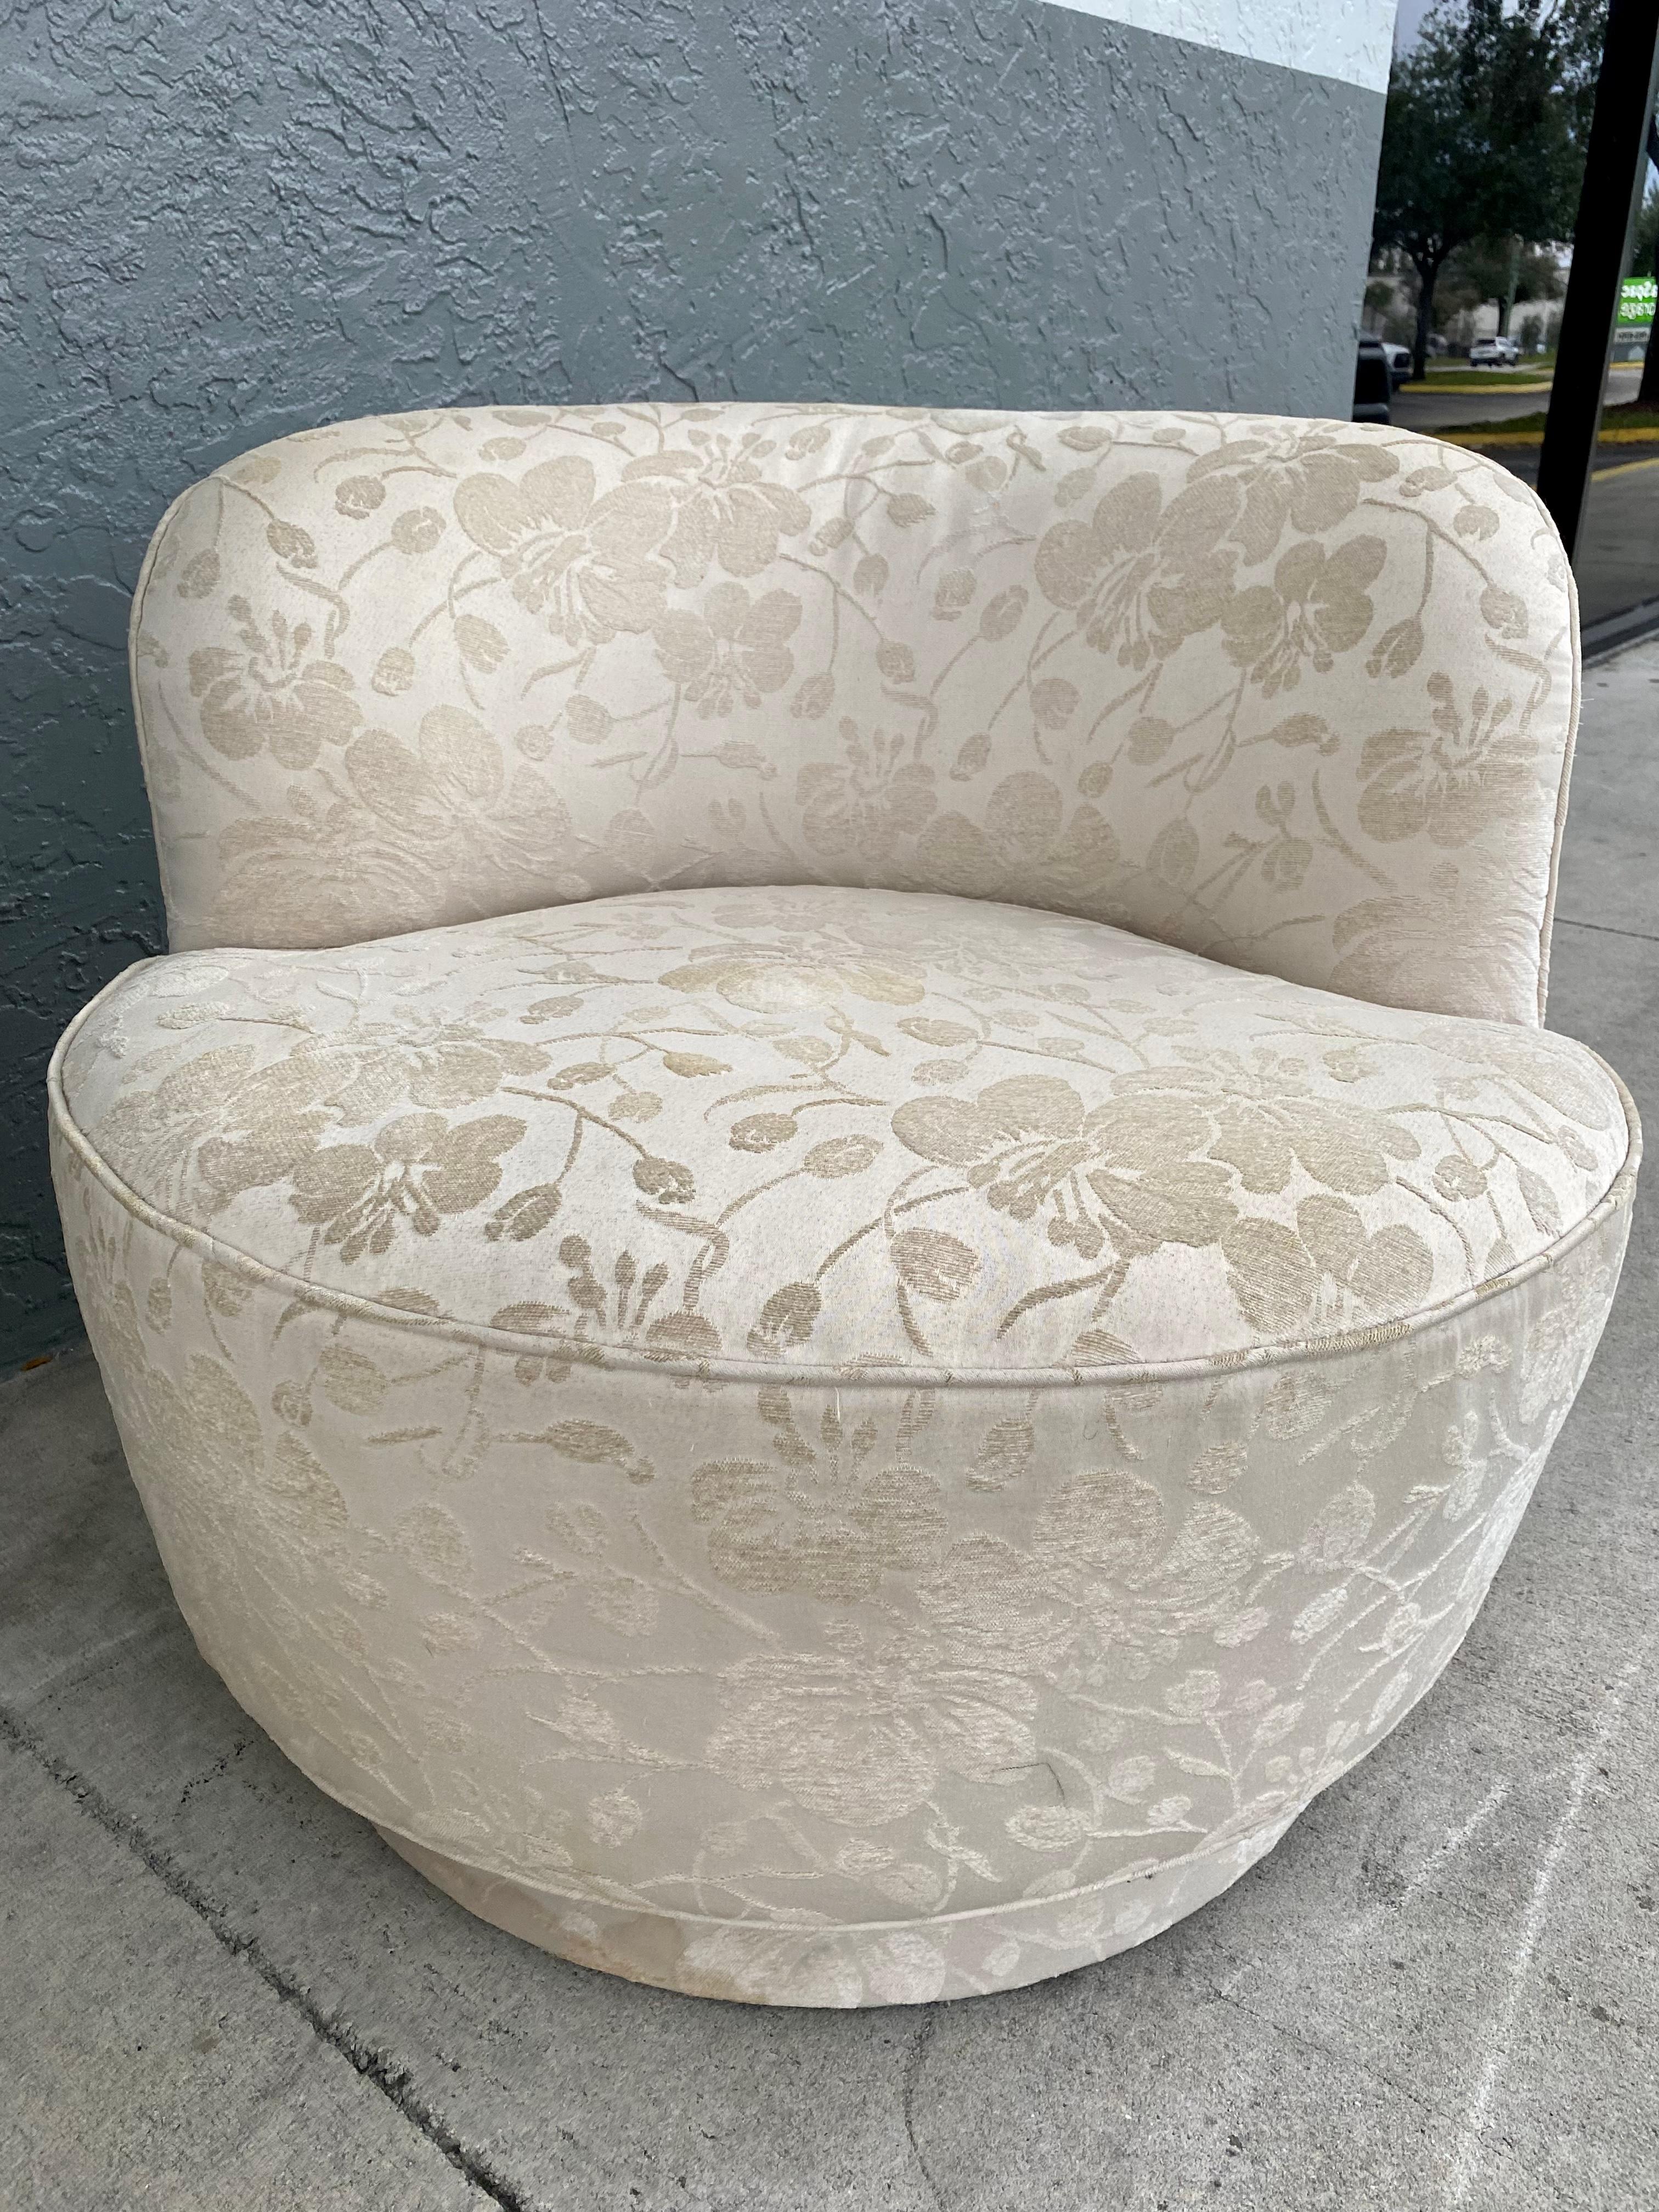 Upholstery 1980s Preview Embroidered Floral Sculptural Curved Swivel Chairs, Set of 2 For Sale